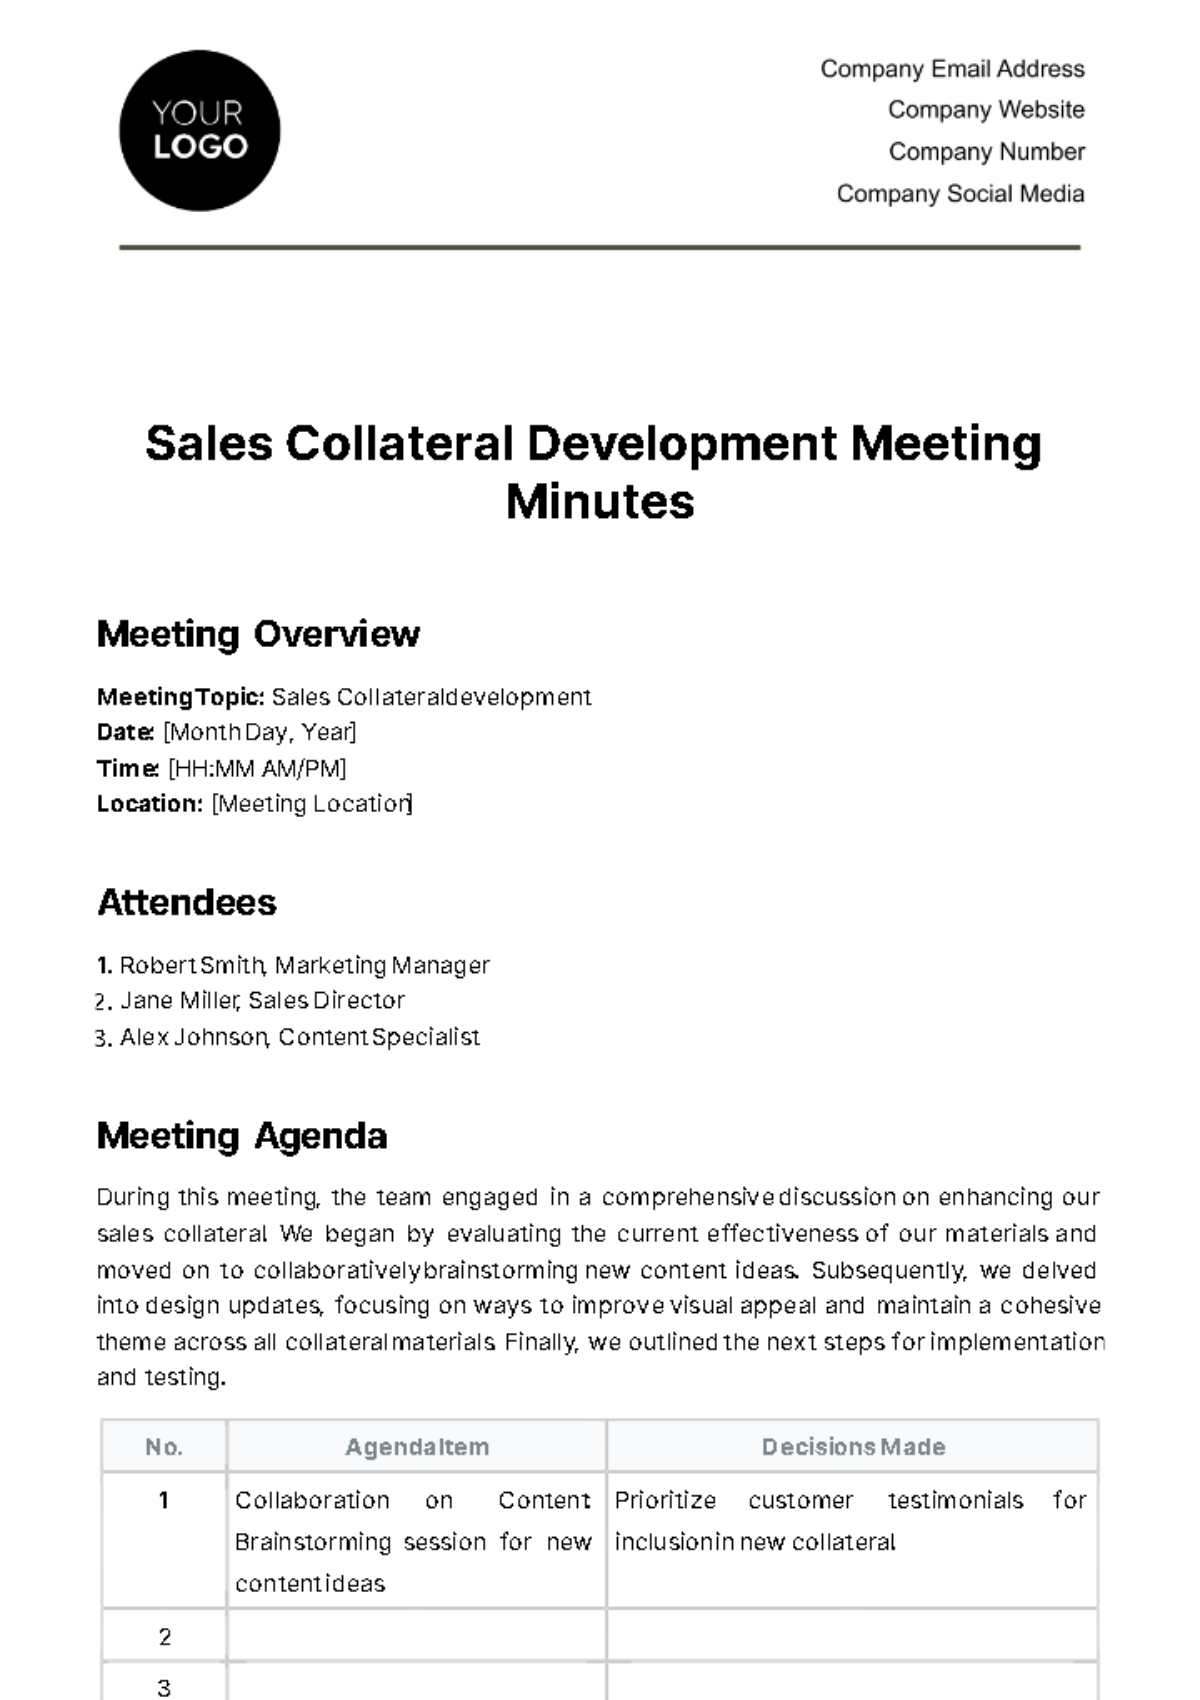 Free Sales Collateral Development Minute Template